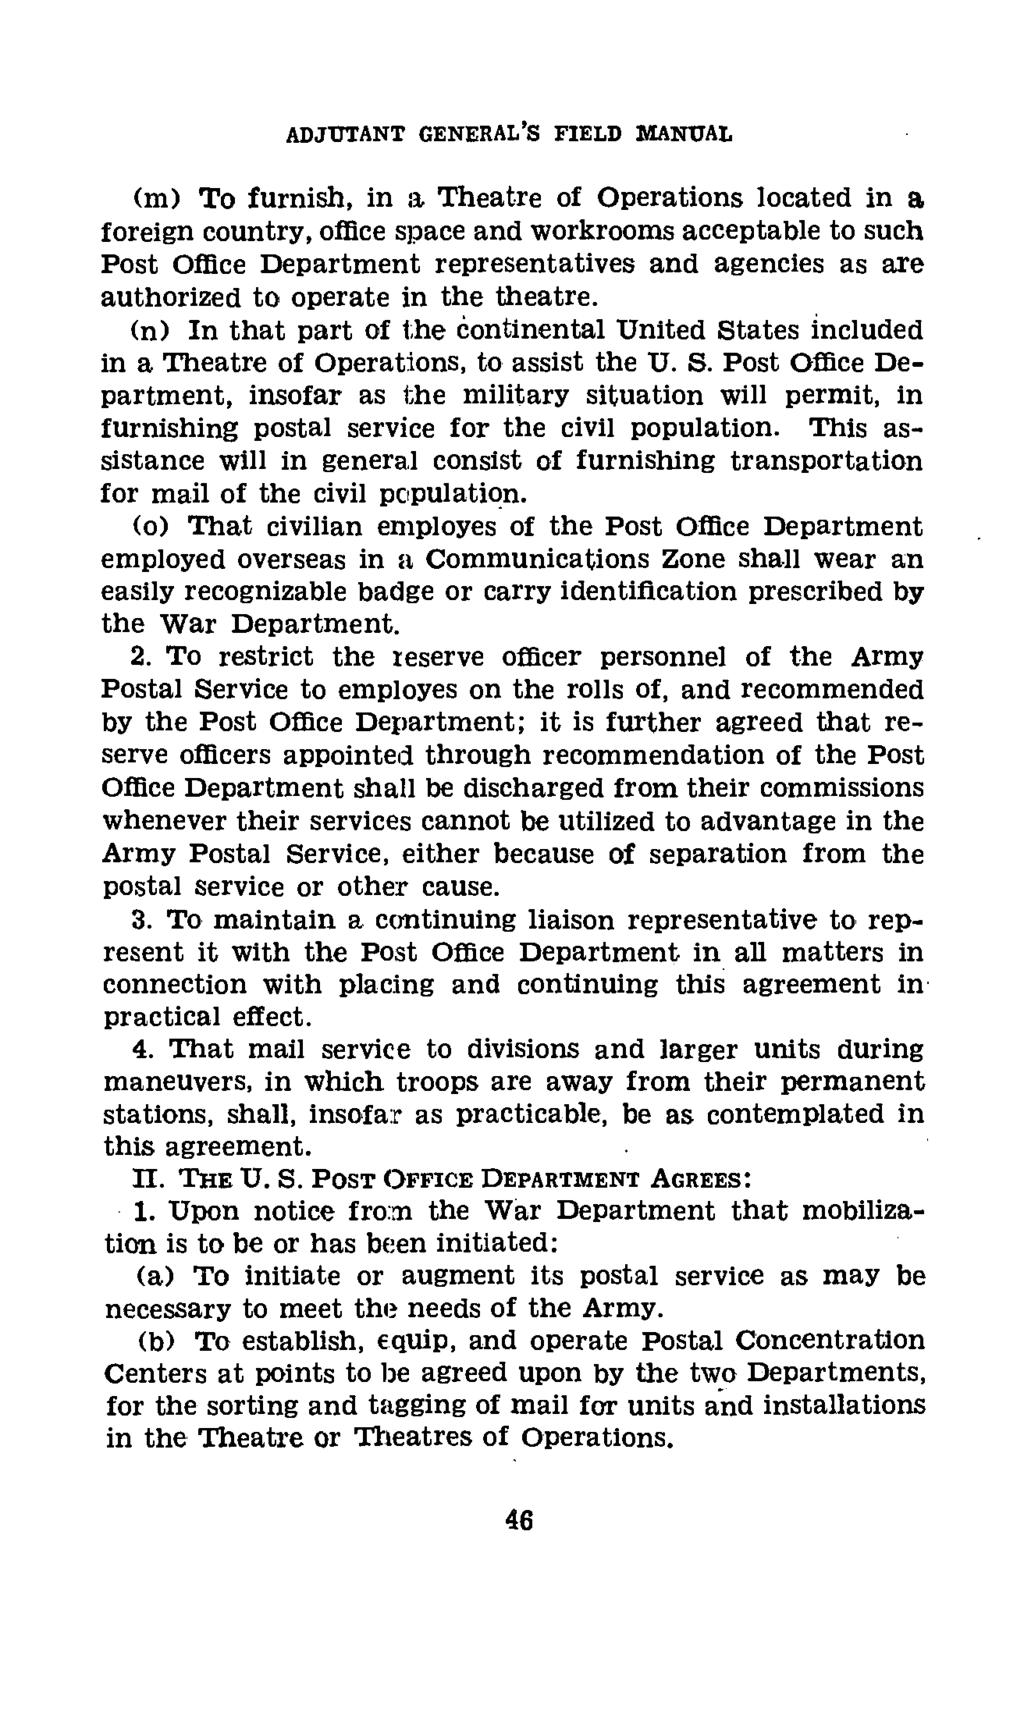 ADJUTANT GENERAL'S FIELD MANUAL (m) To furnish, in a Theatre of Operations located in a foreign country, office space and workrooms acceptable to such Post Office Department representatives and